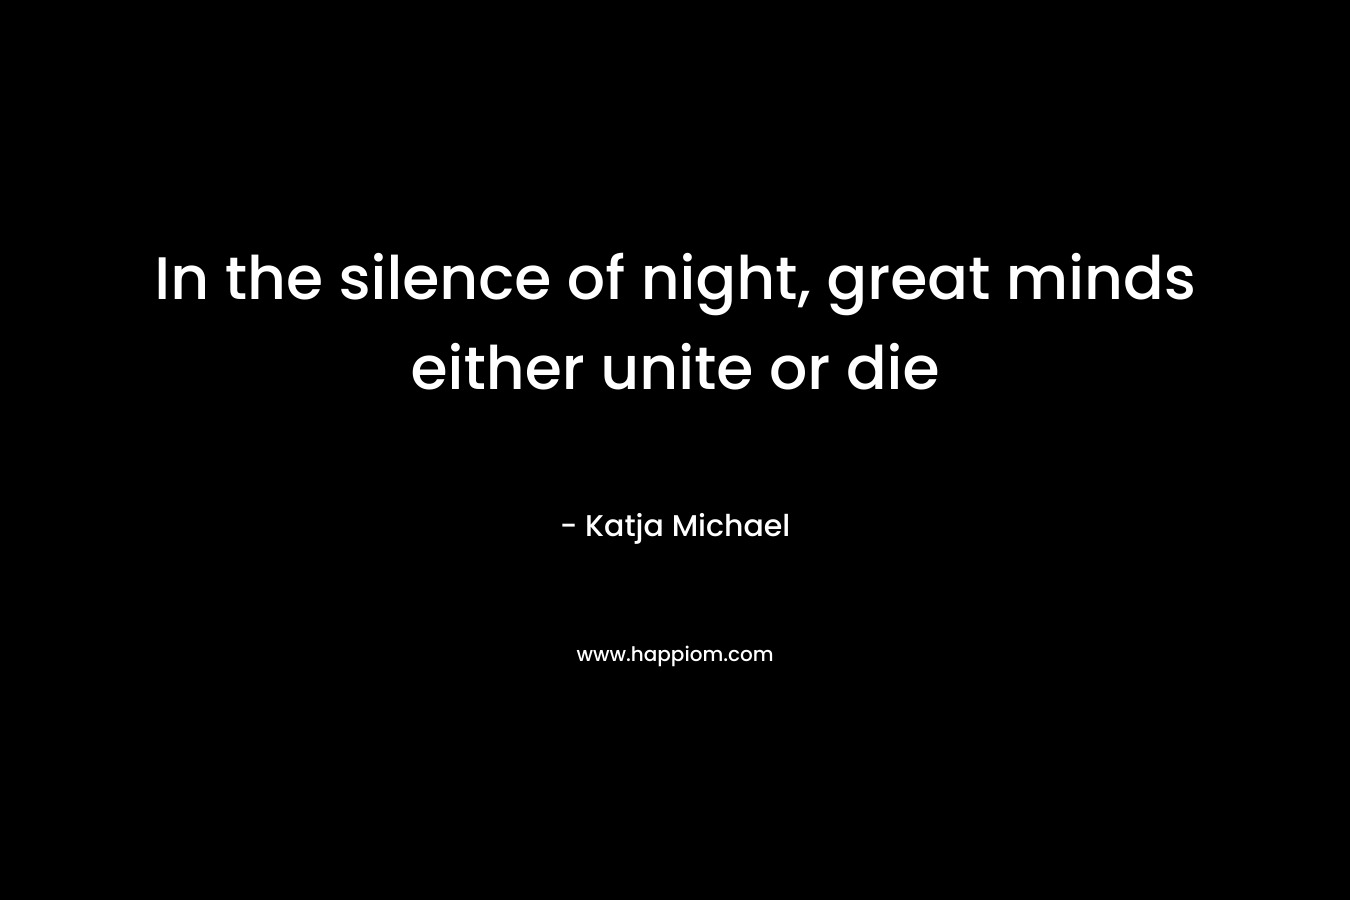 In the silence of night, great minds either unite or die – Katja Michael